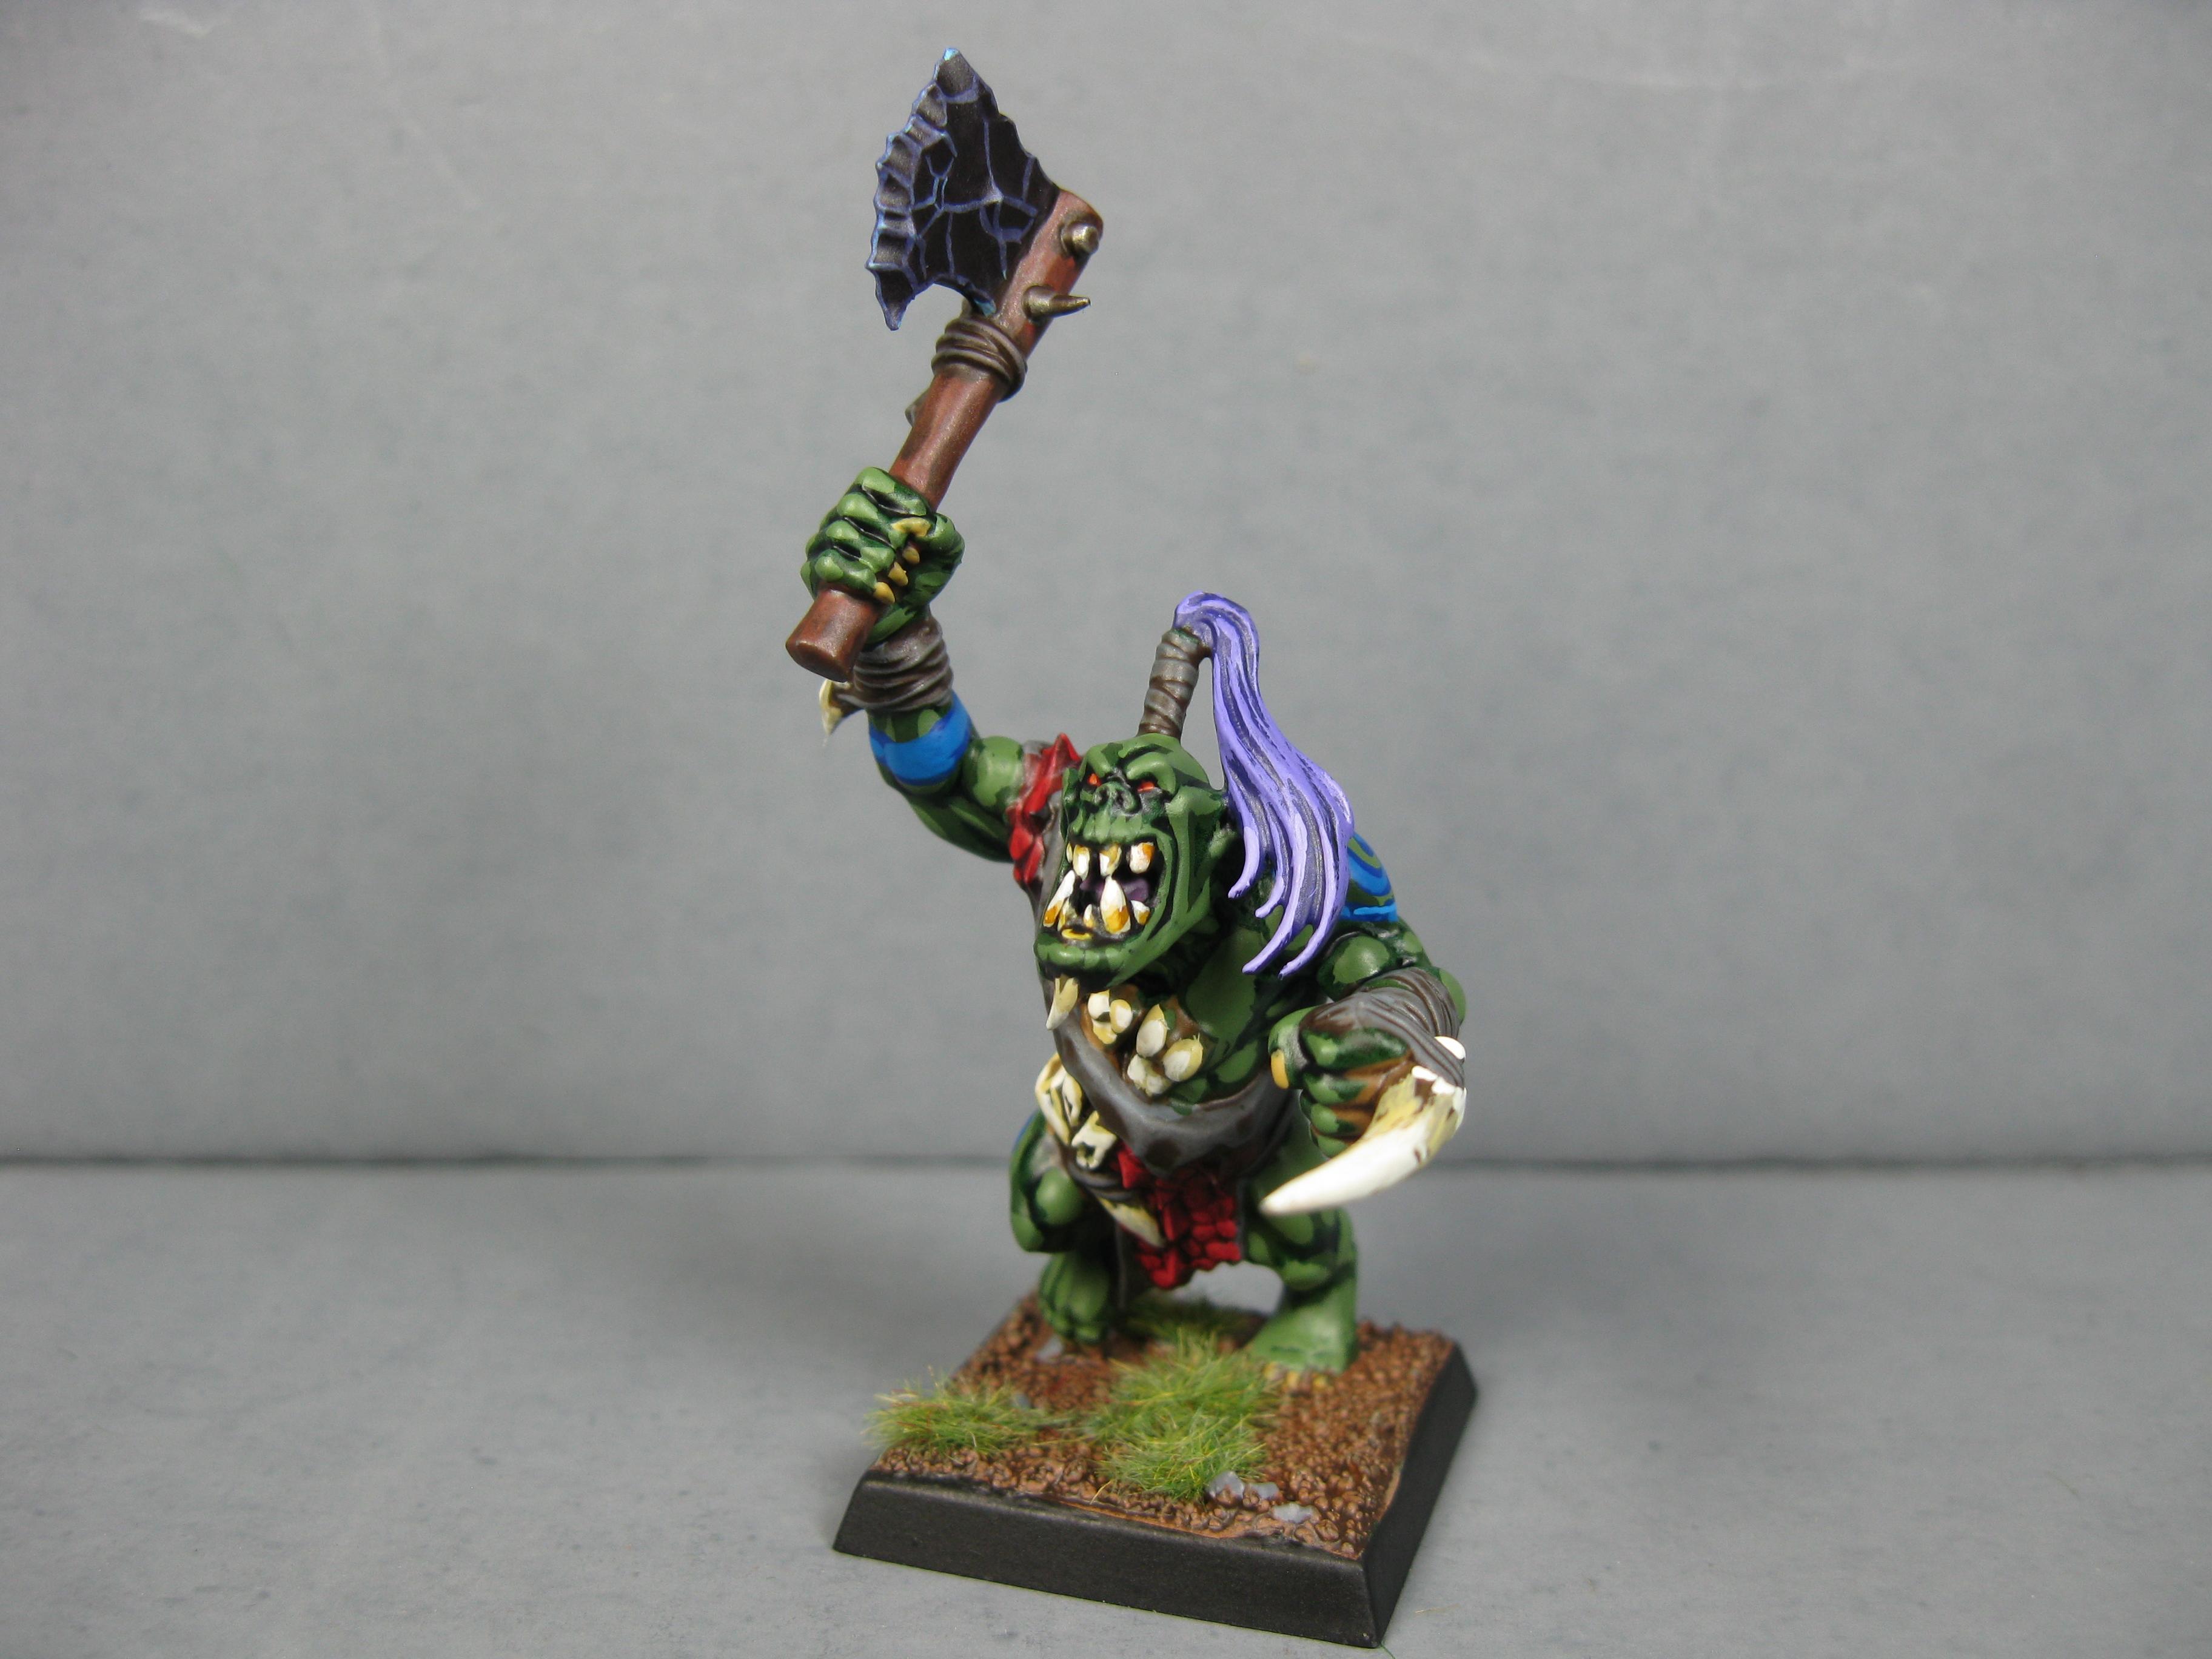 Goblins, Gobos, Orcs, Orcs And Goblins, Orks, Pro Painted, Rpg, Warhammer Fantasy